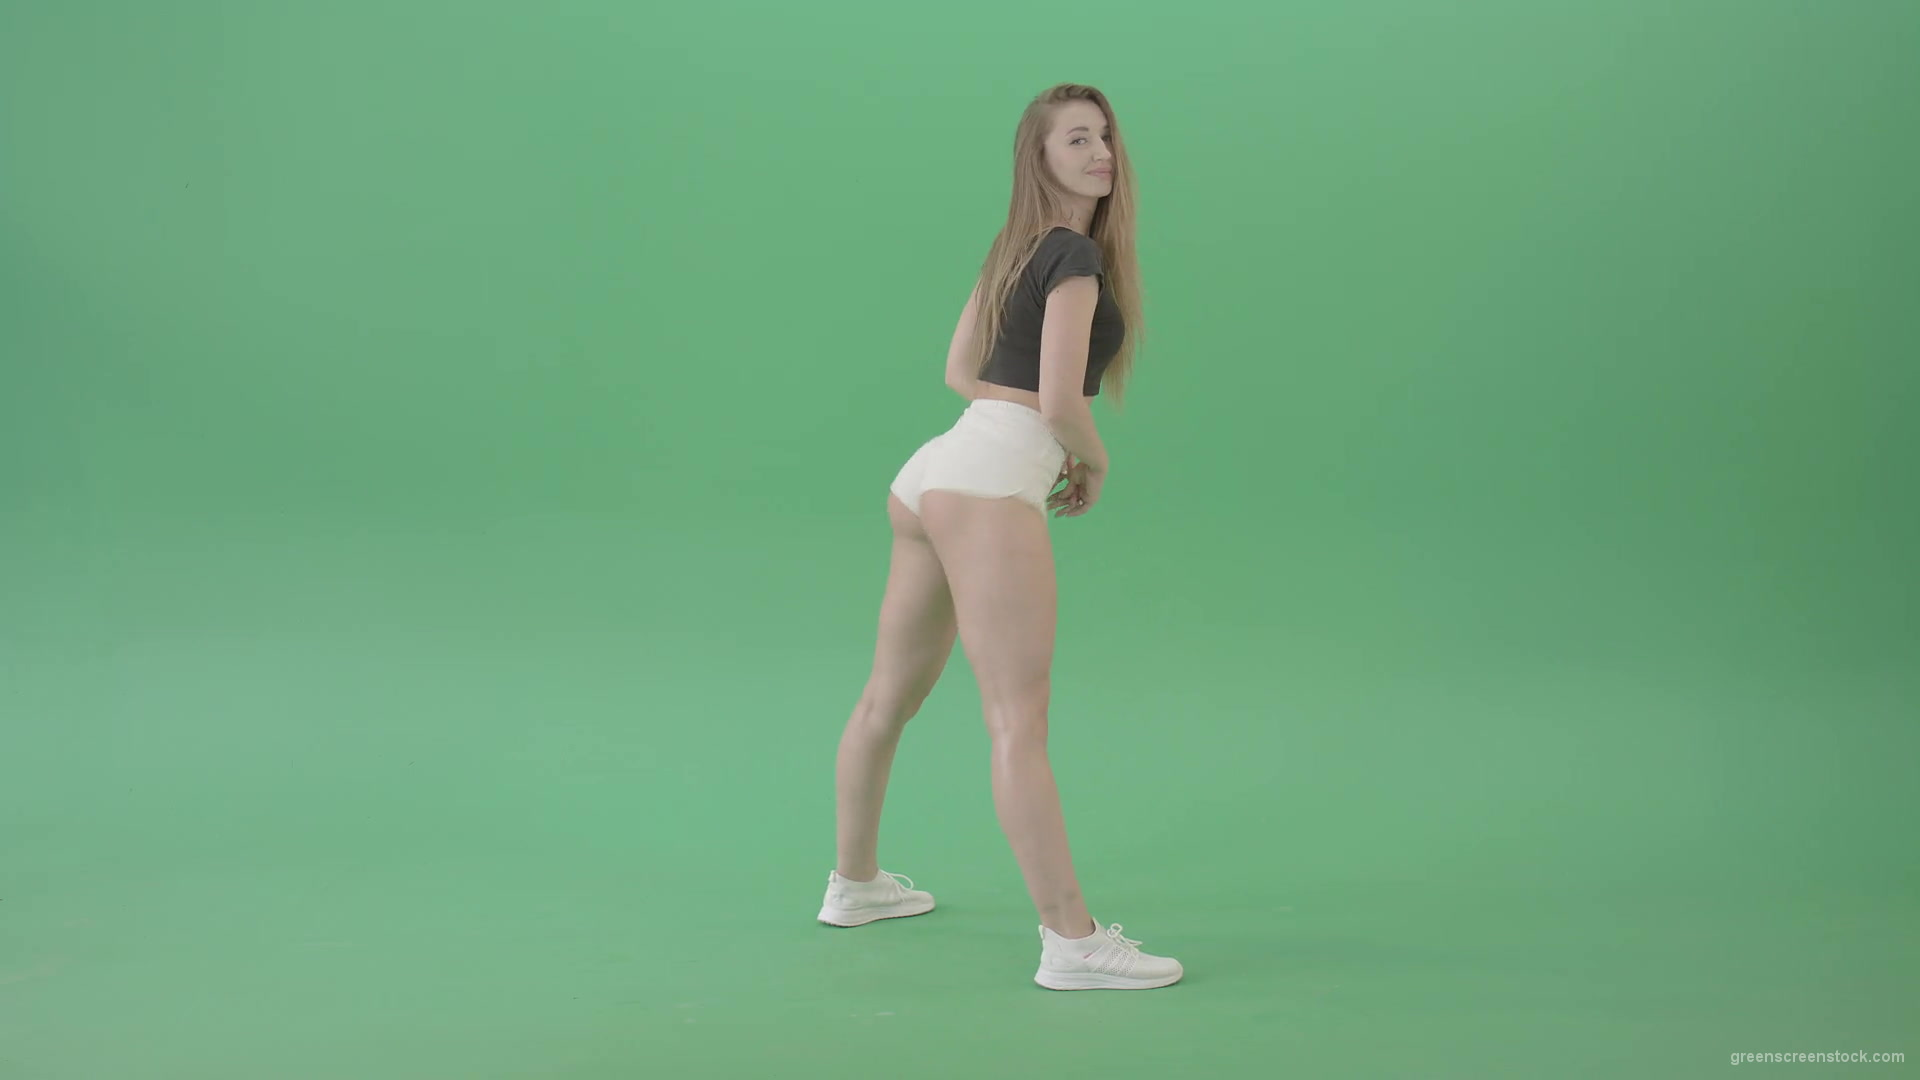 Amazing-young-woman-shaking-ass-in-side-view-twerking-dance-over-green-screen-4K-Video-Footage-1920_009 Green Screen Stock